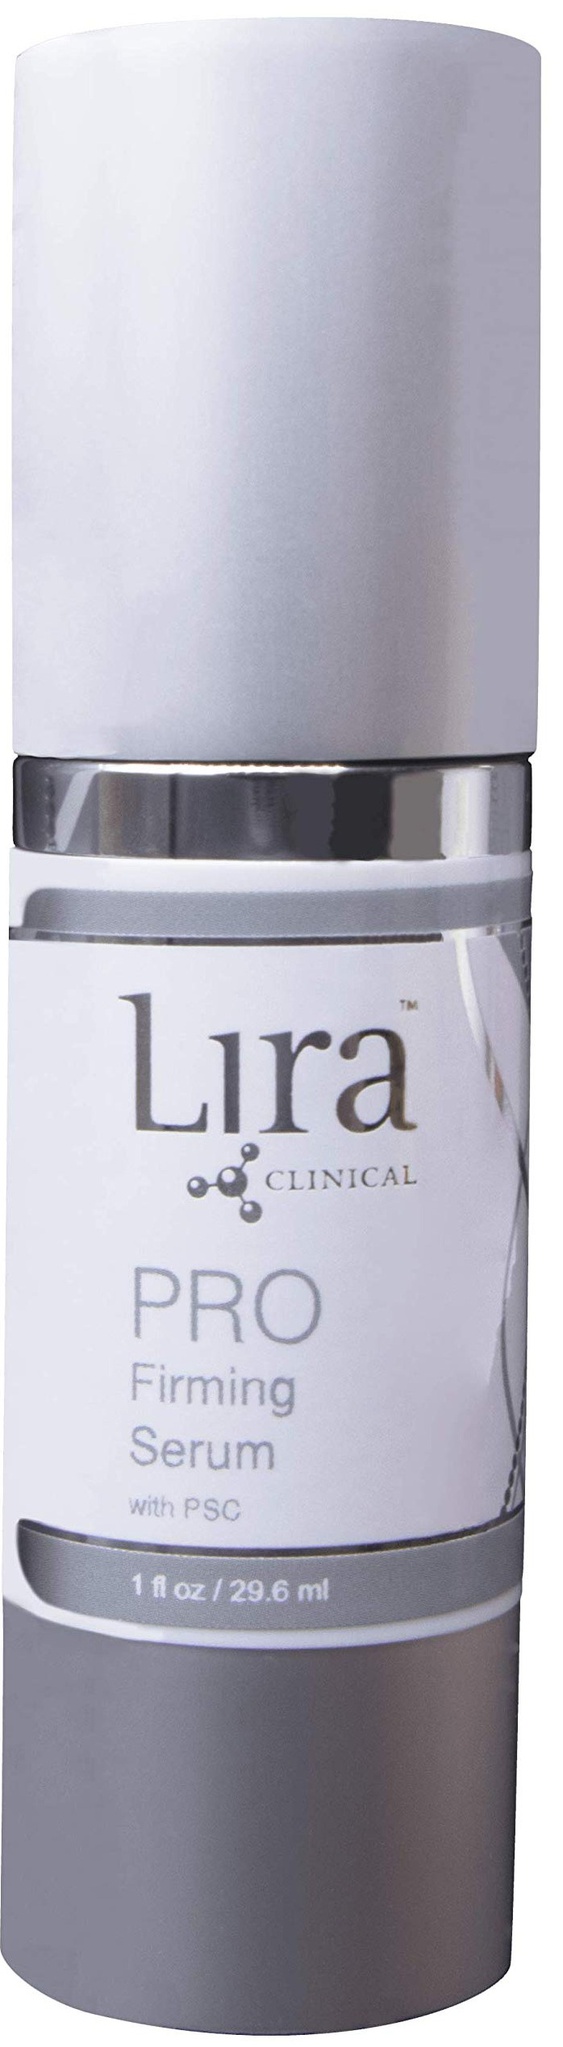 Lira Clinical Pro Firming Serum With Psc